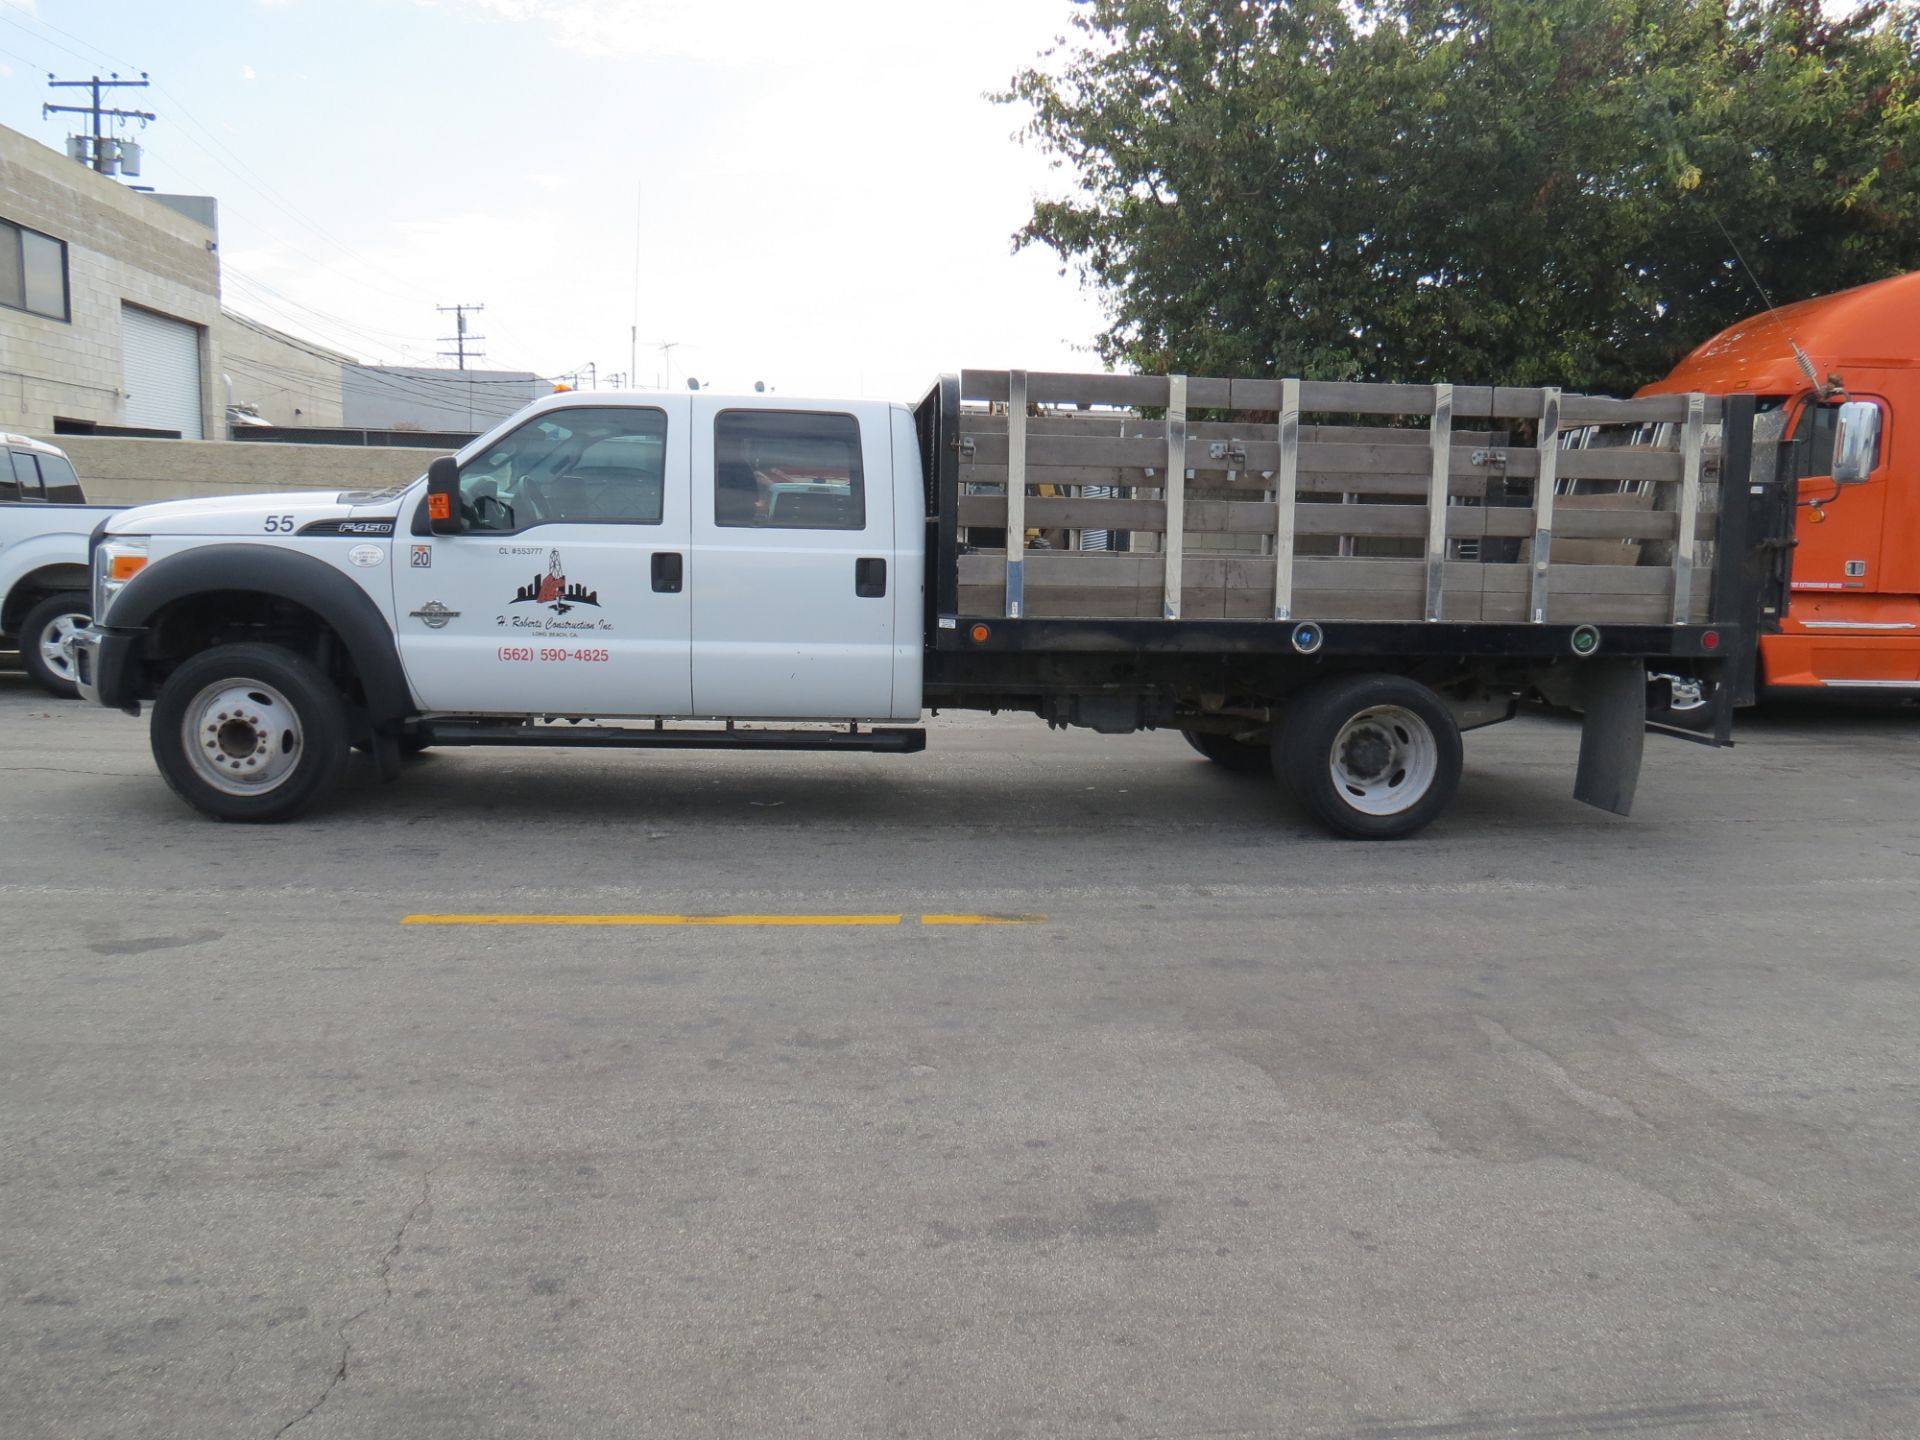 2015 Ford F-450 SUPER DUTY STAKE BED TRUCK, WITH LIFT GATE, SUPER CREW CAB , 6.7 POWER STROKE DIESEL - Image 7 of 34